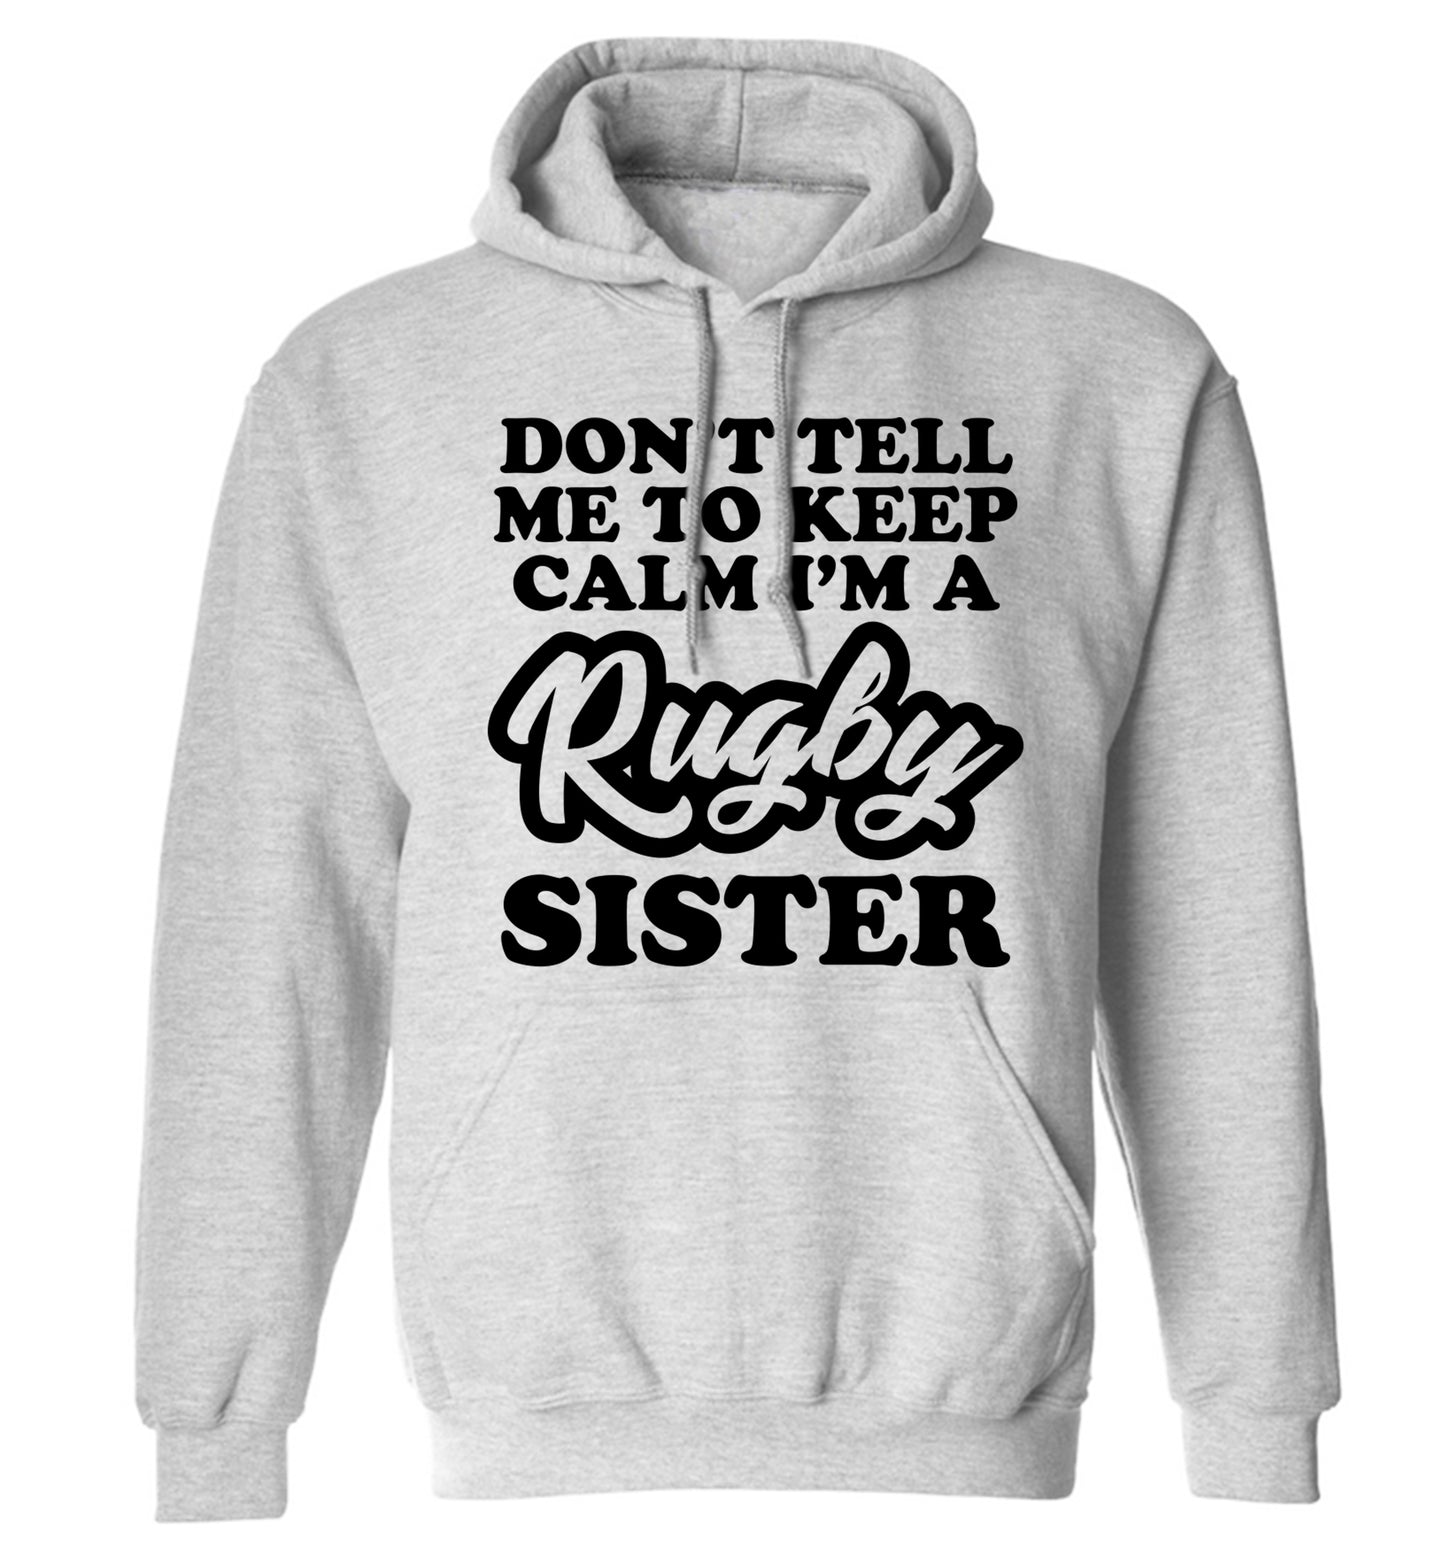 Don't tell me keep calm I'm a rugby sister adults unisex grey hoodie 2XL